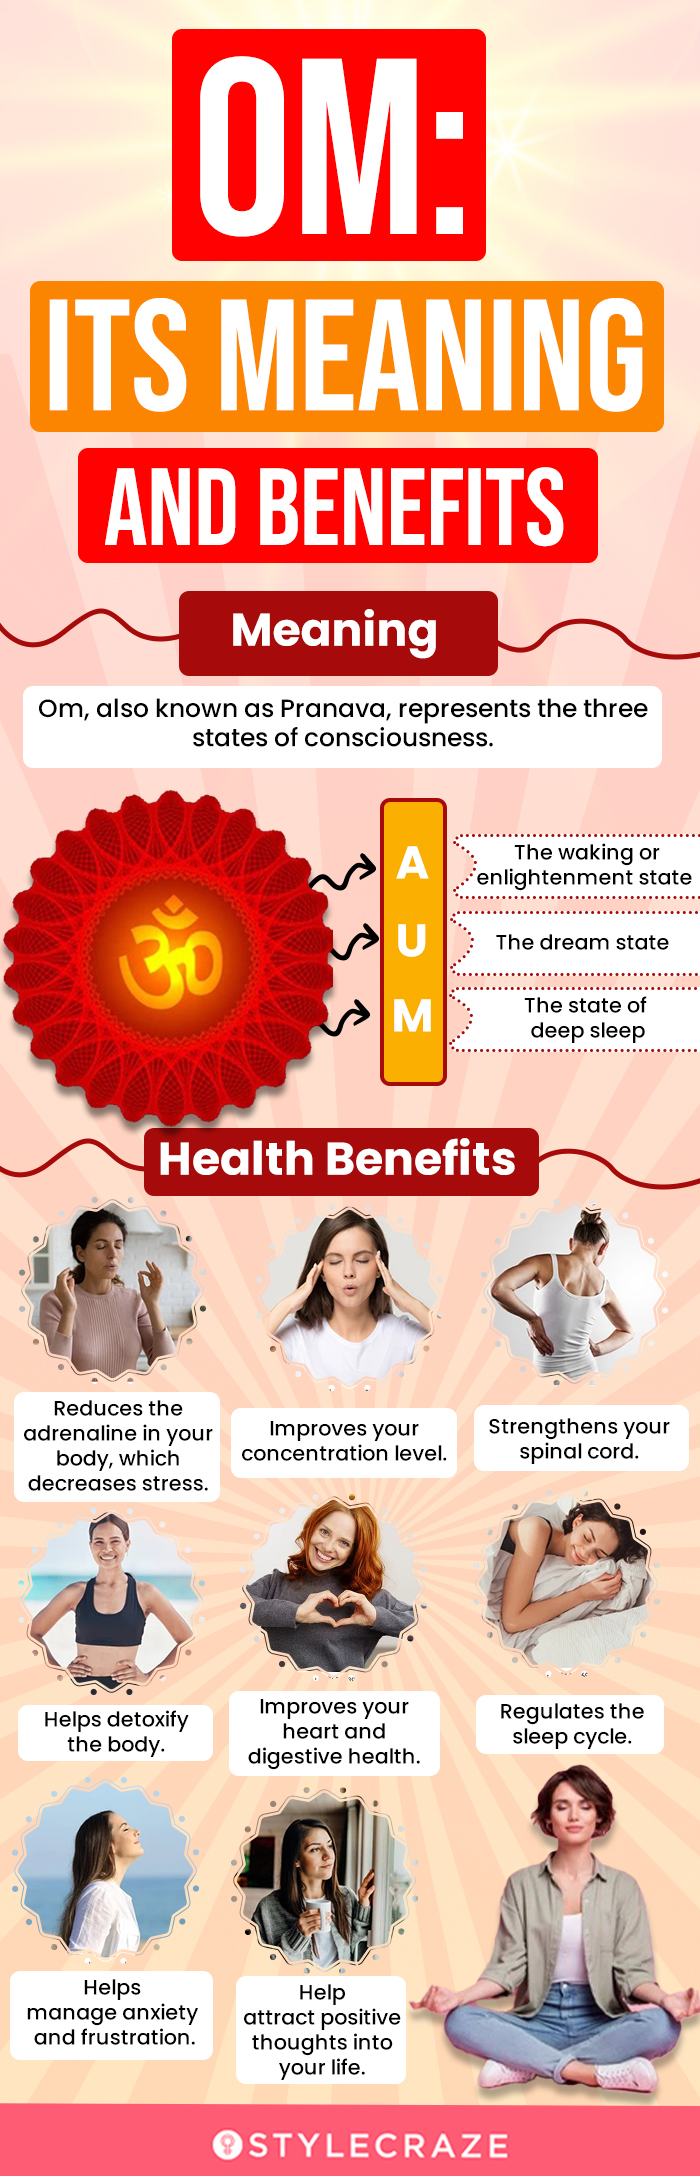 om its meaning and benefits (infographic)